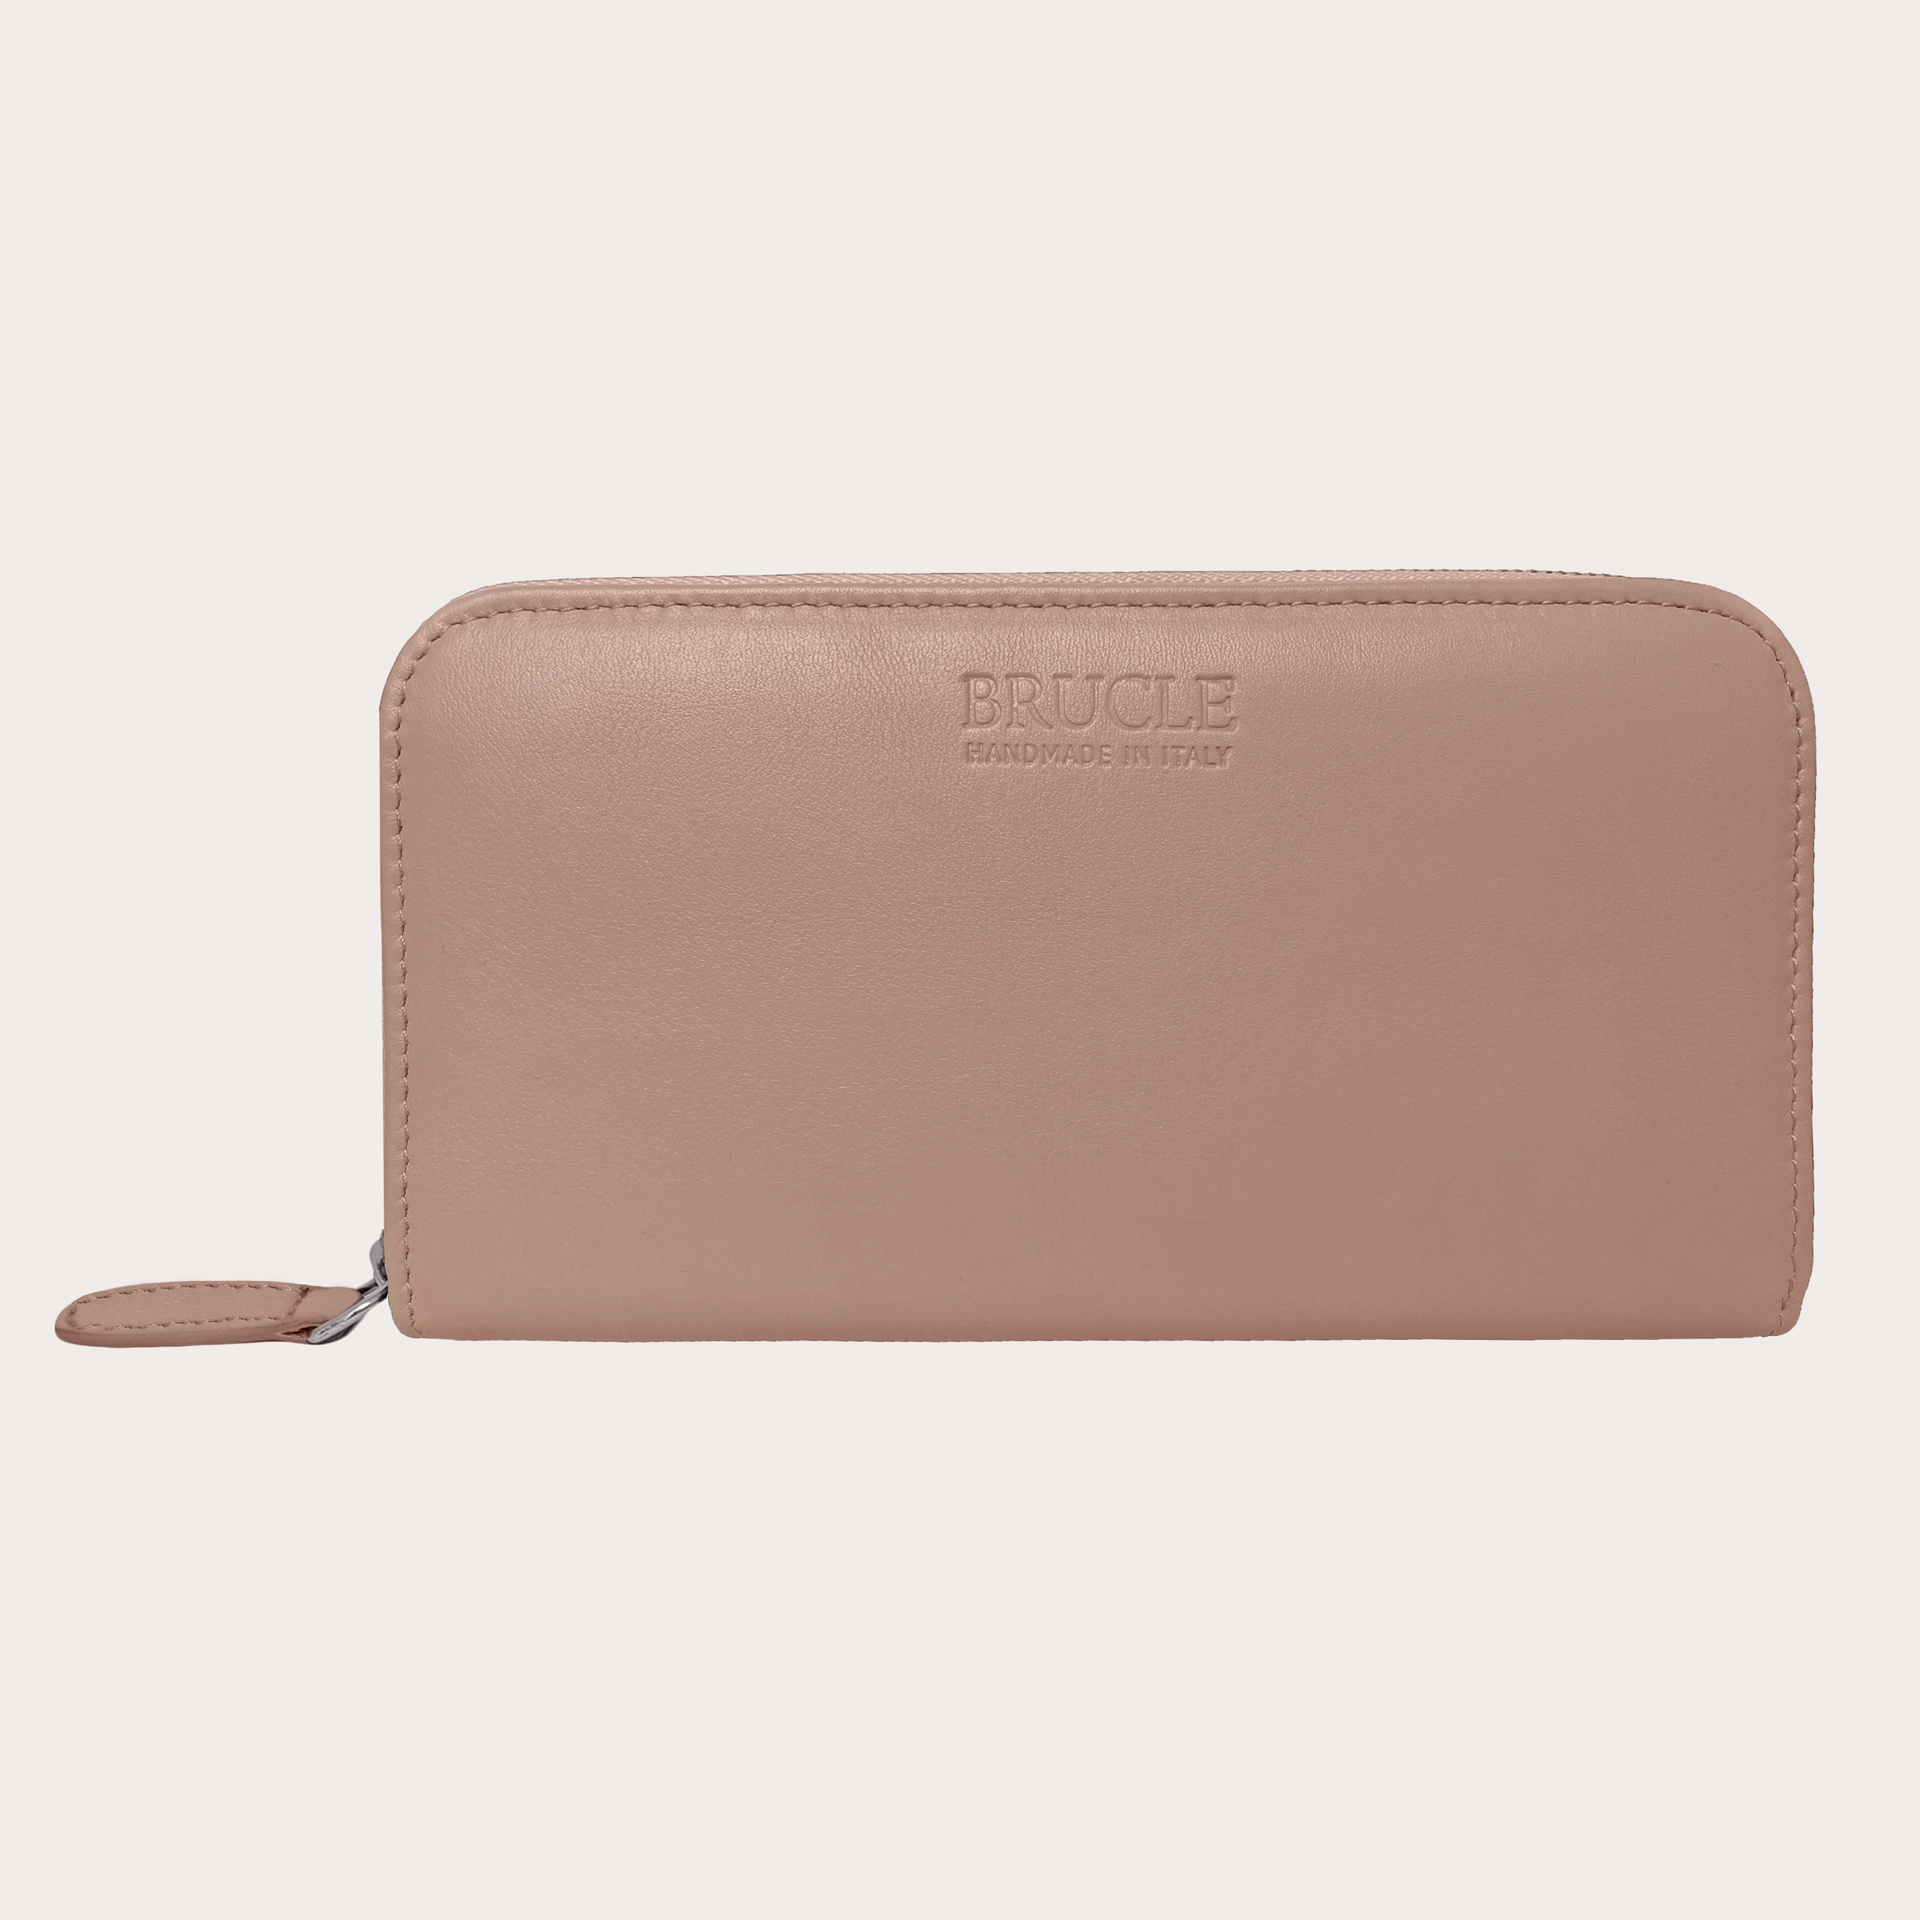 BRUCLE Refined women's wallet in leather with zip, powder color